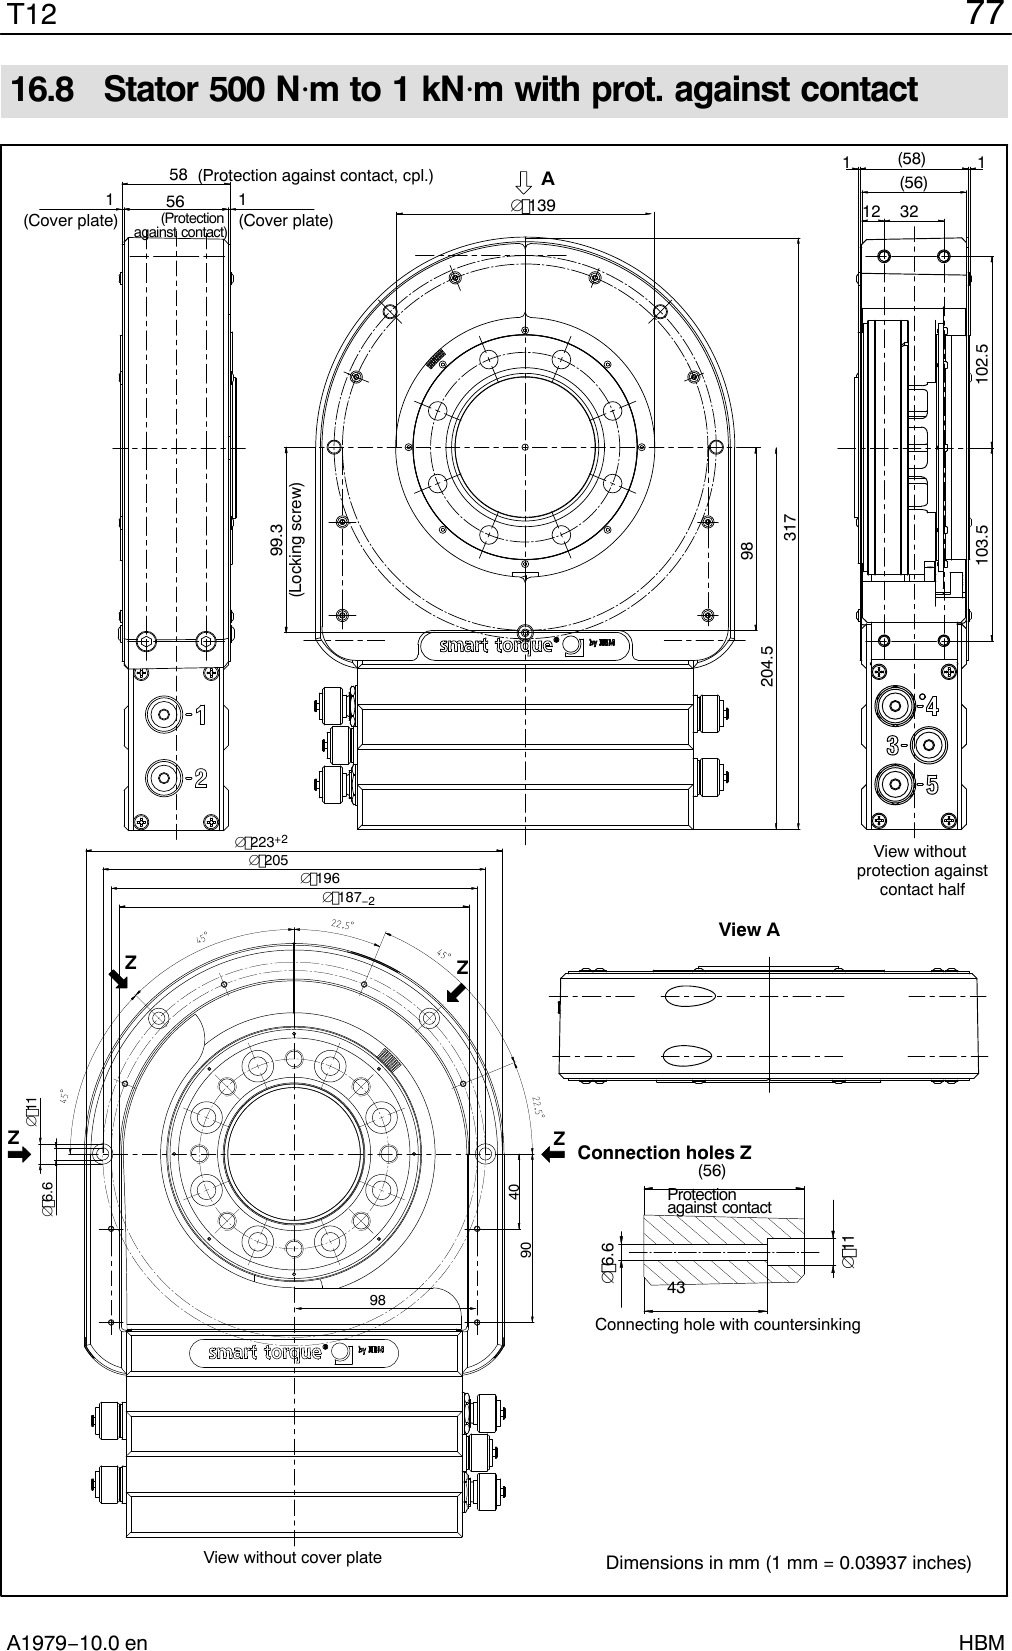 77T12A1979−10.0 en HBM16.8  Stator 500 Nm to 1 kNm with prot. against contactAView AConnection holes Z(Protection against contact)View without cover plateProtection against contactConnecting hole with countersinking(56)436.6(Protection against contact, cpl.)View without protection againstcontact half(Cover plate)5811(Cover plate)56 139(56)(58)1112 32103.5 102.5204.5317981199.3(Locking screw)ZZZZ223+2205187−2116.61964090 98Dimensions in mm (1 mm = 0.03937 inches)